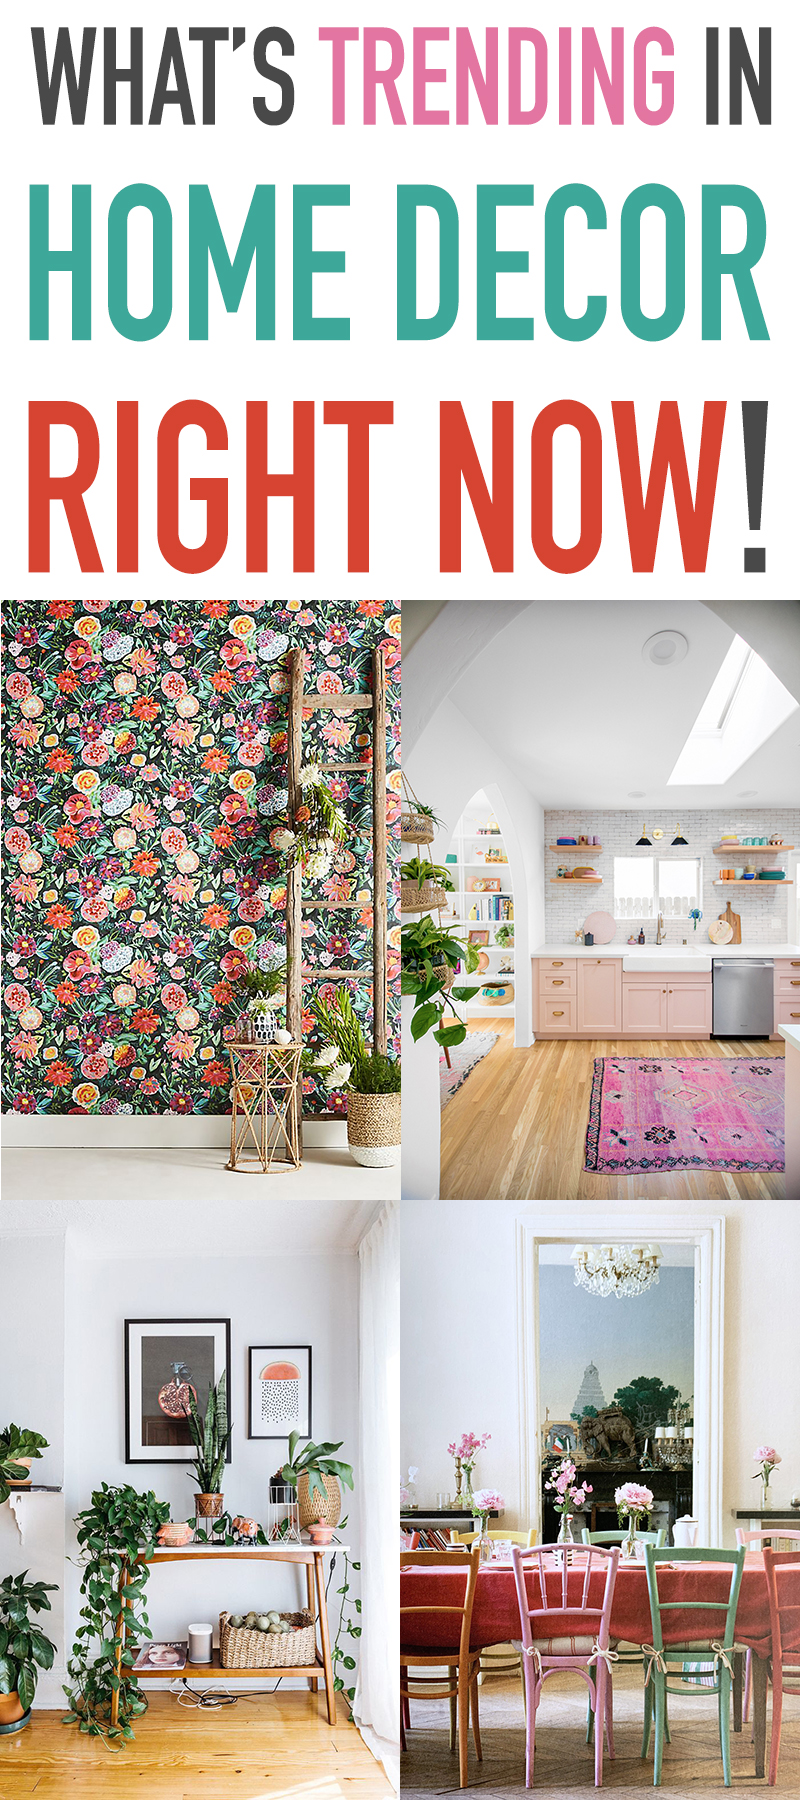 If you want to check out What's Trending In Home Decor Right now... come and take a peek at a few hot trends I think you will enjoy!